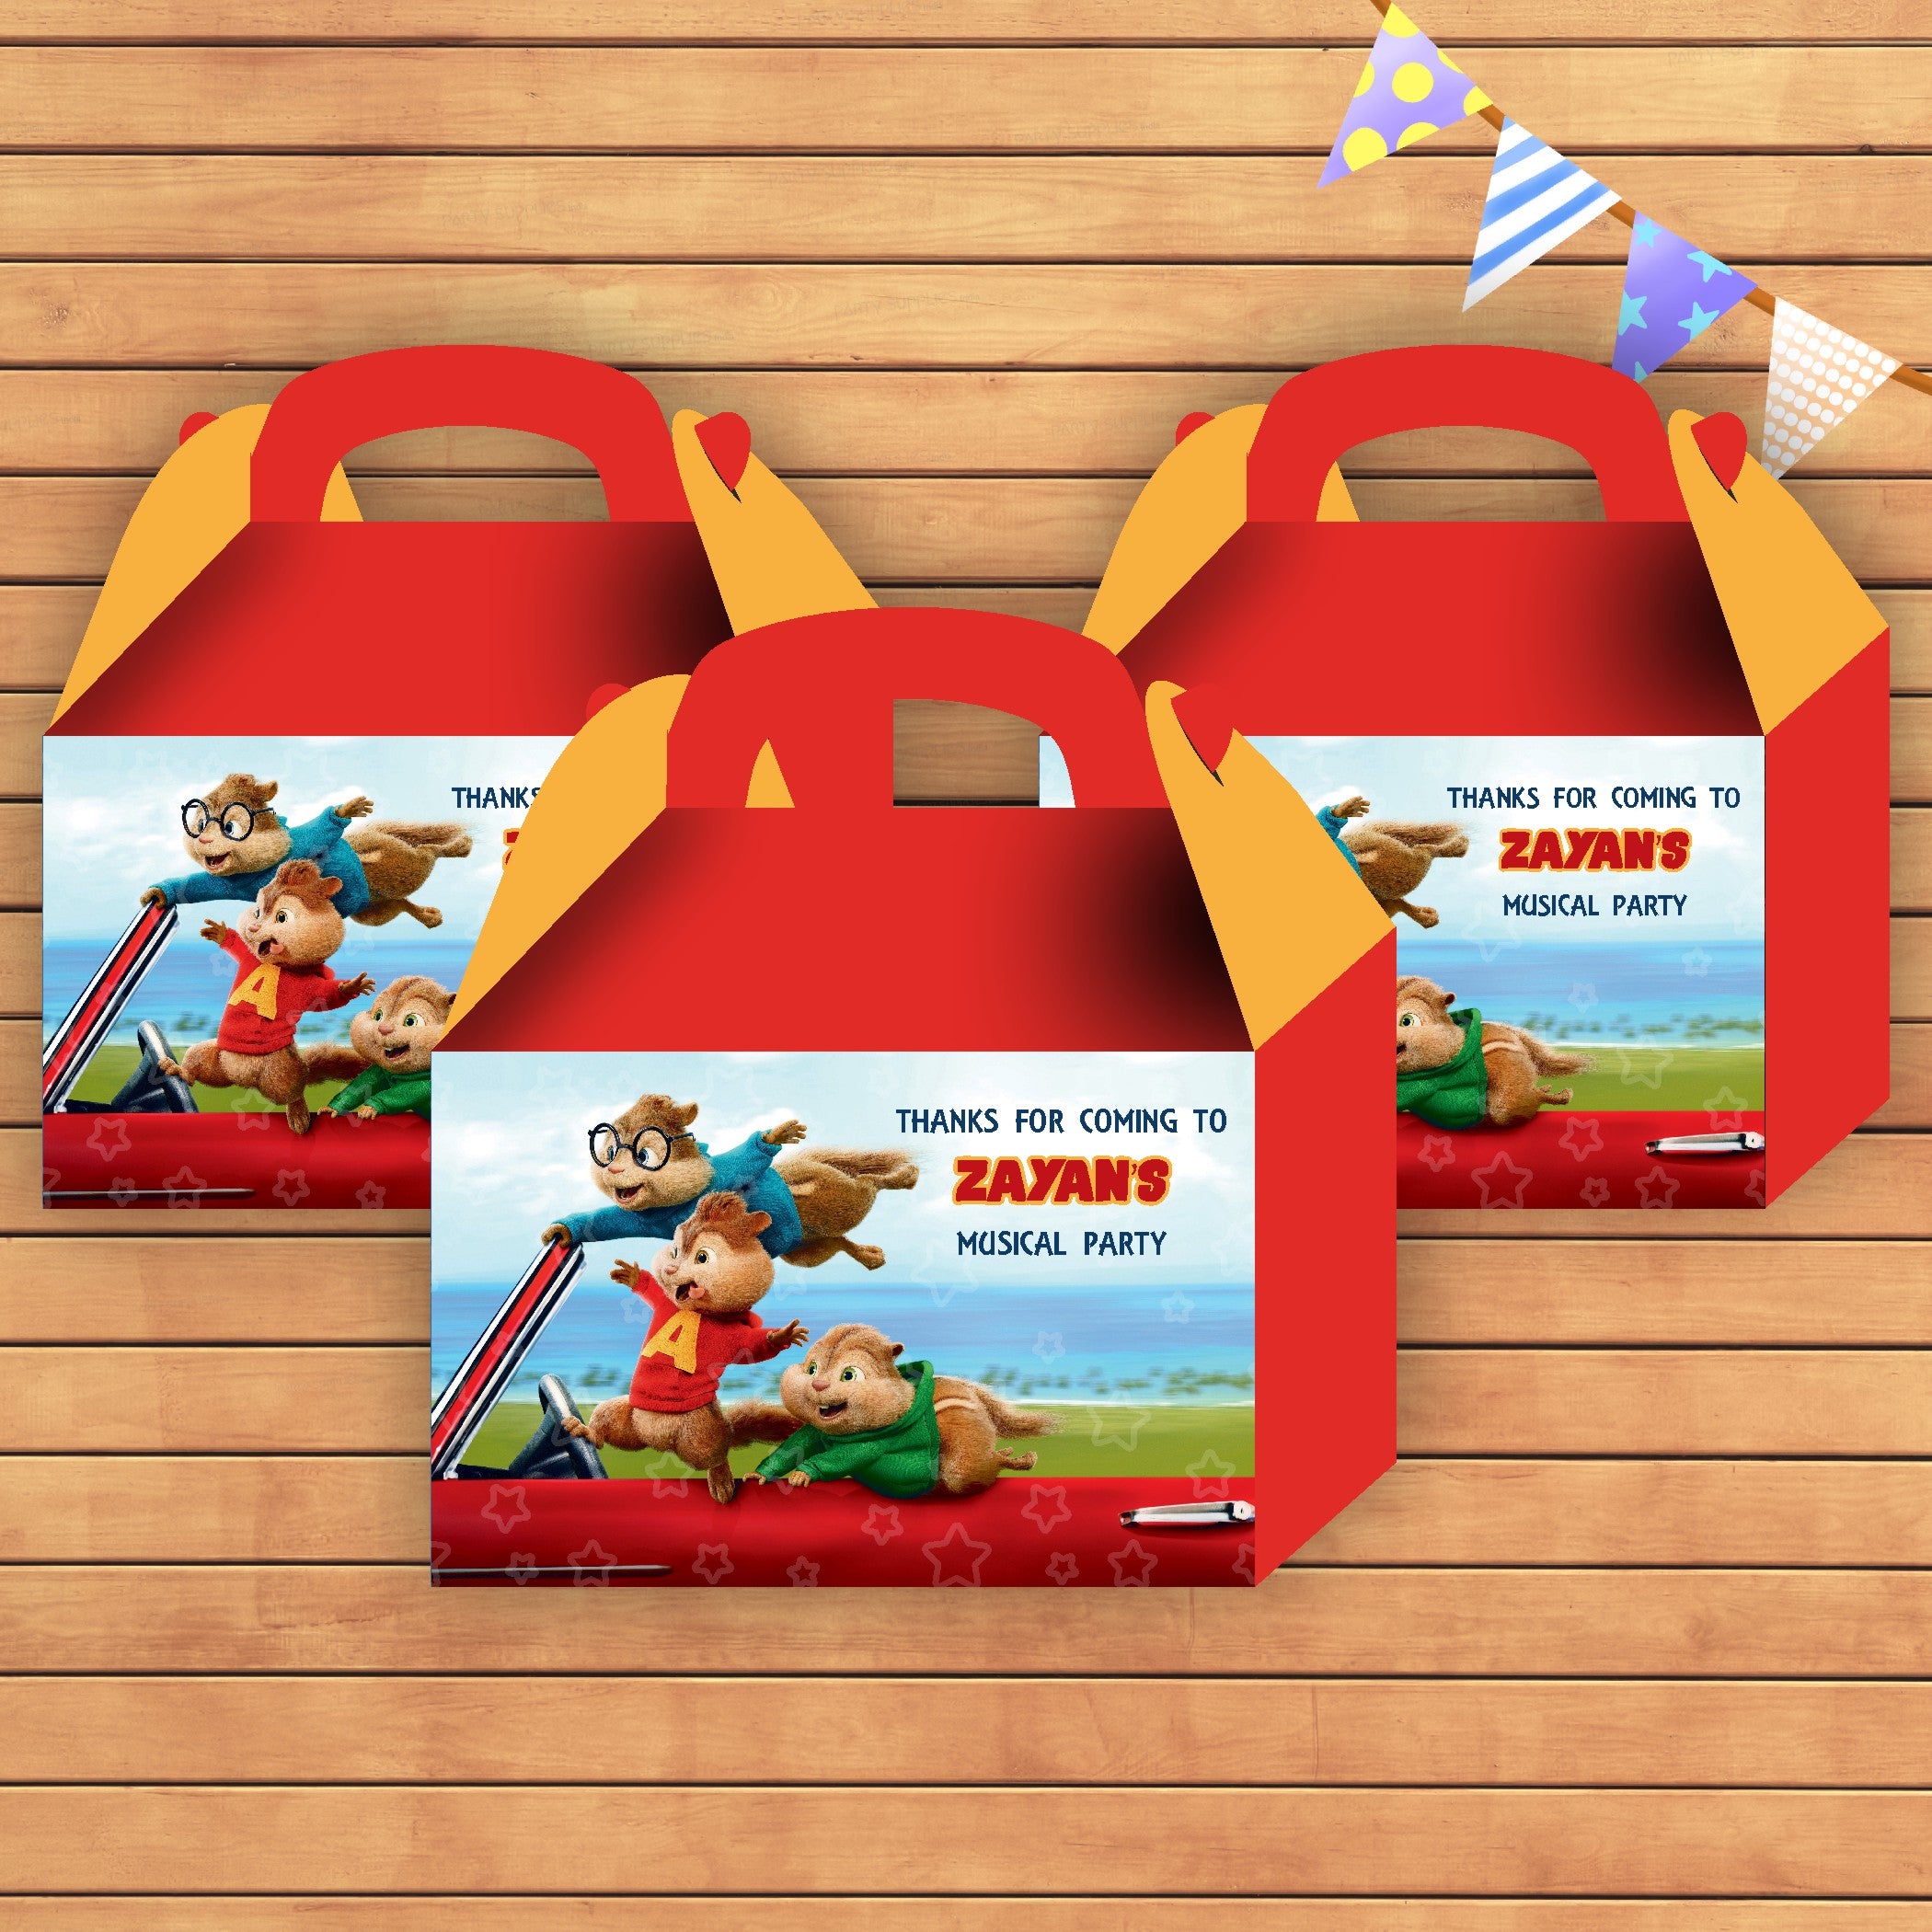 PSI Alvin and Chipmunks theme Goodie Return Gift Boxes